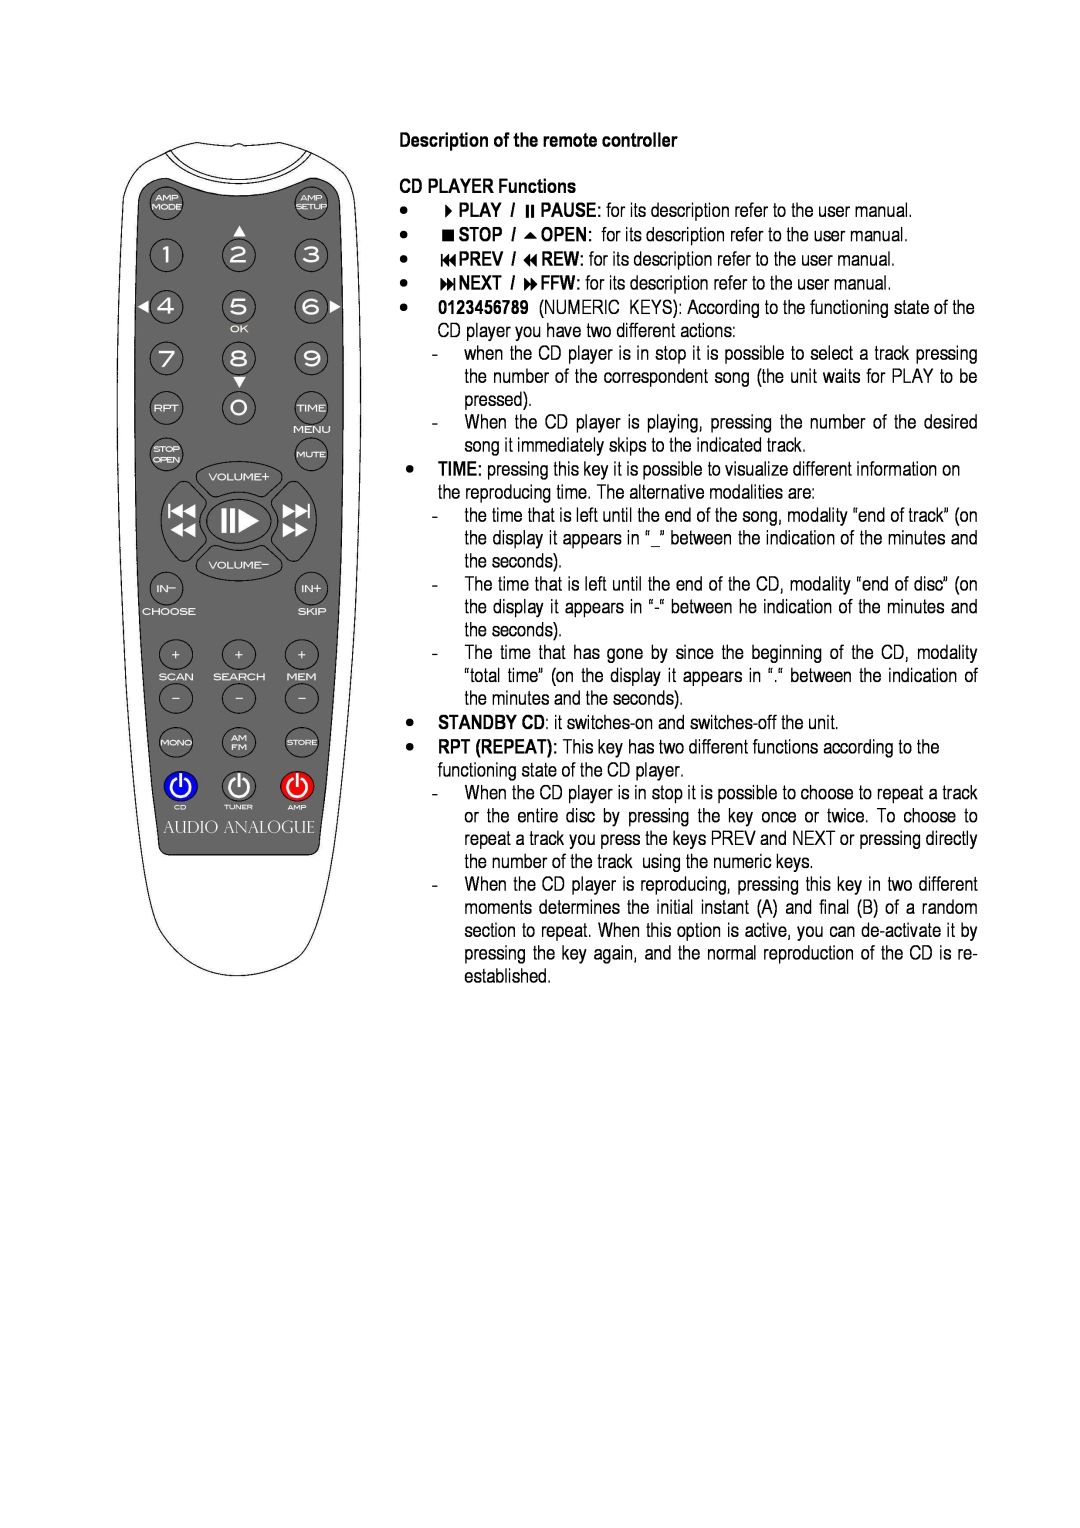 Audio Analogue SRL Rossini 2.0 owner manual Description of the remote controller, CD PLAYER Functions 